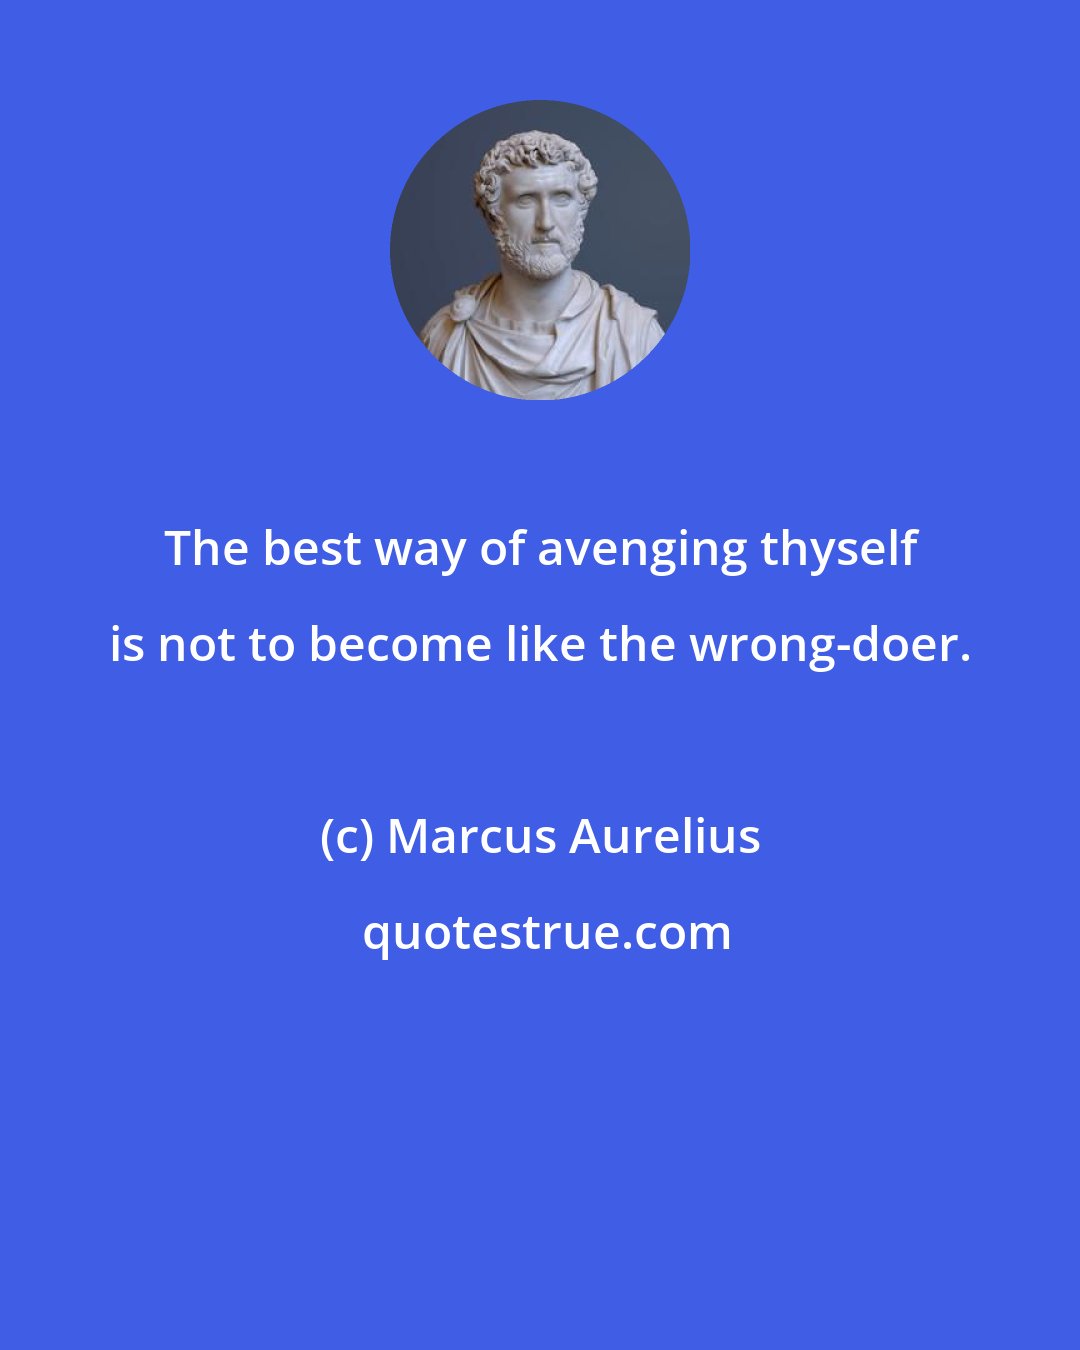 Marcus Aurelius: The best way of avenging thyself is not to become like the wrong-doer.